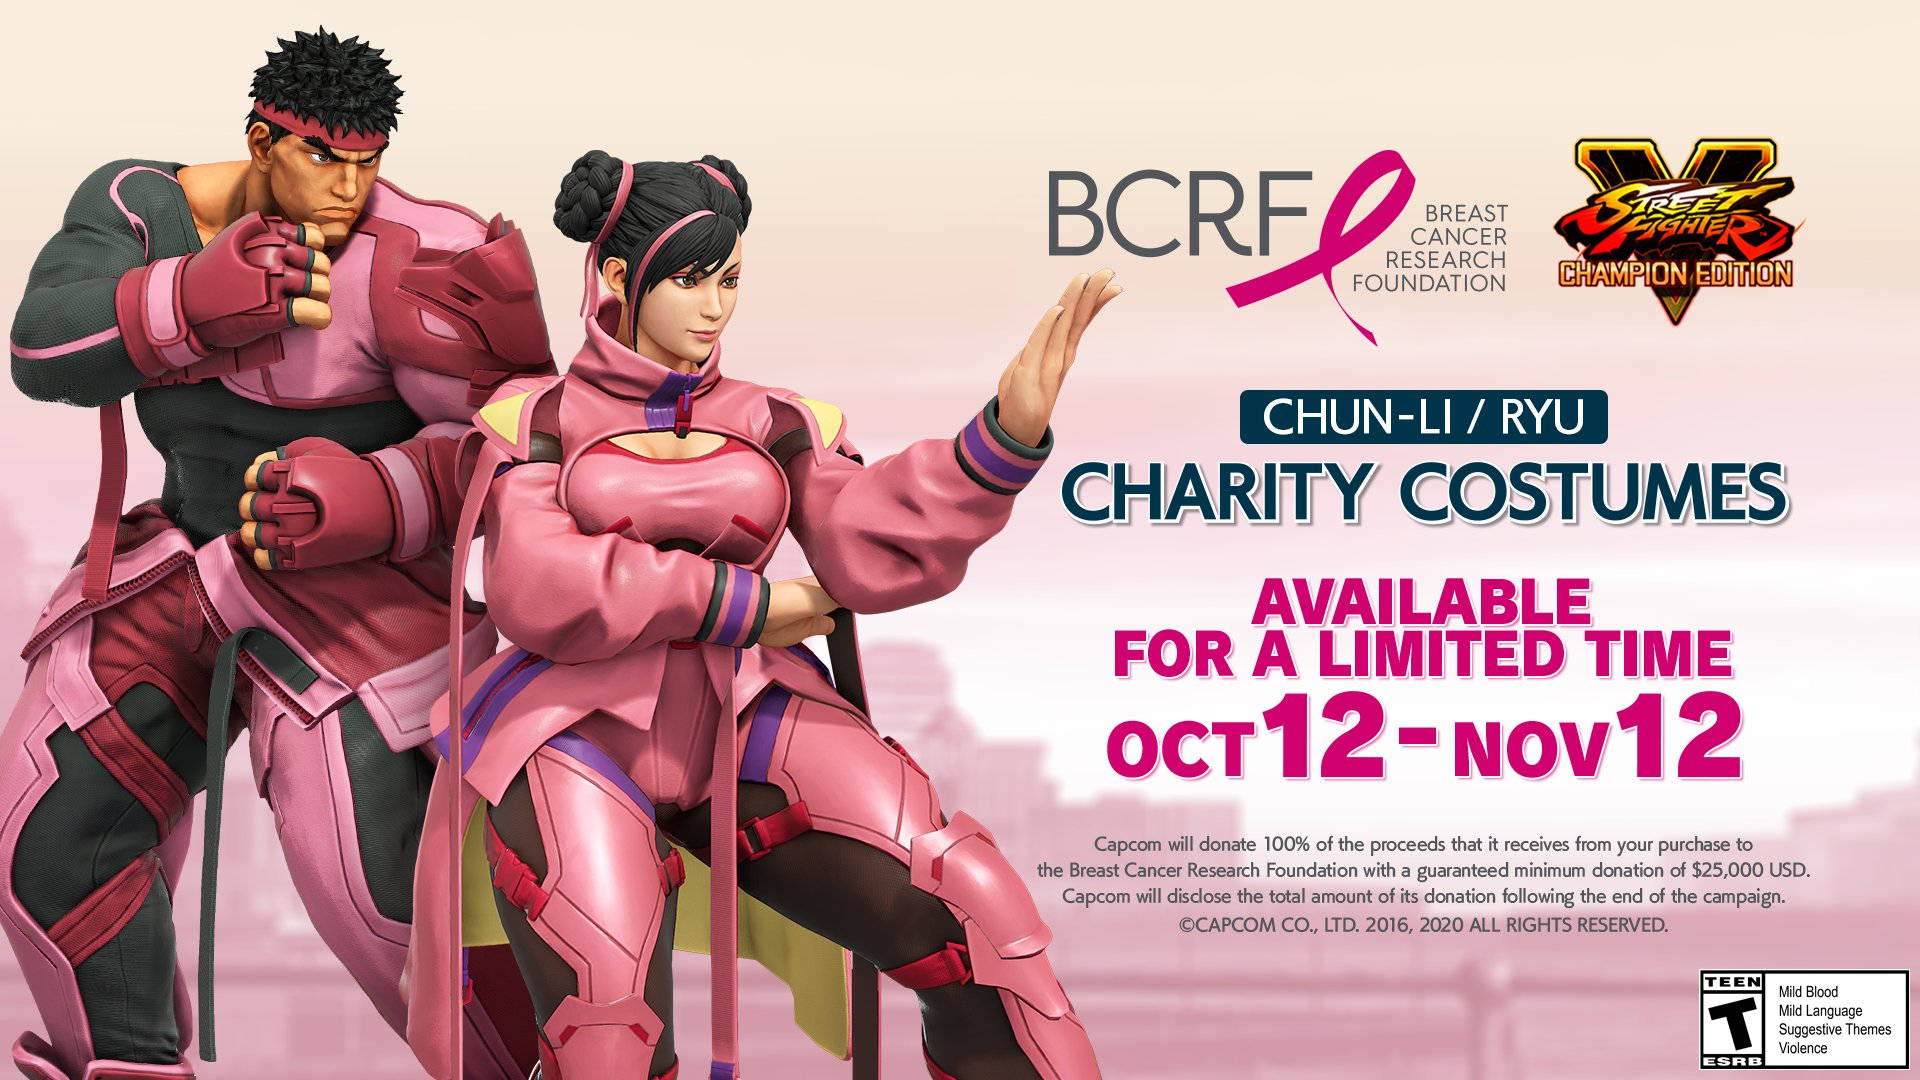 Street Fighter 5 Charity Ryu Chun-Li Costume Breast Cancer Research Foundation banner